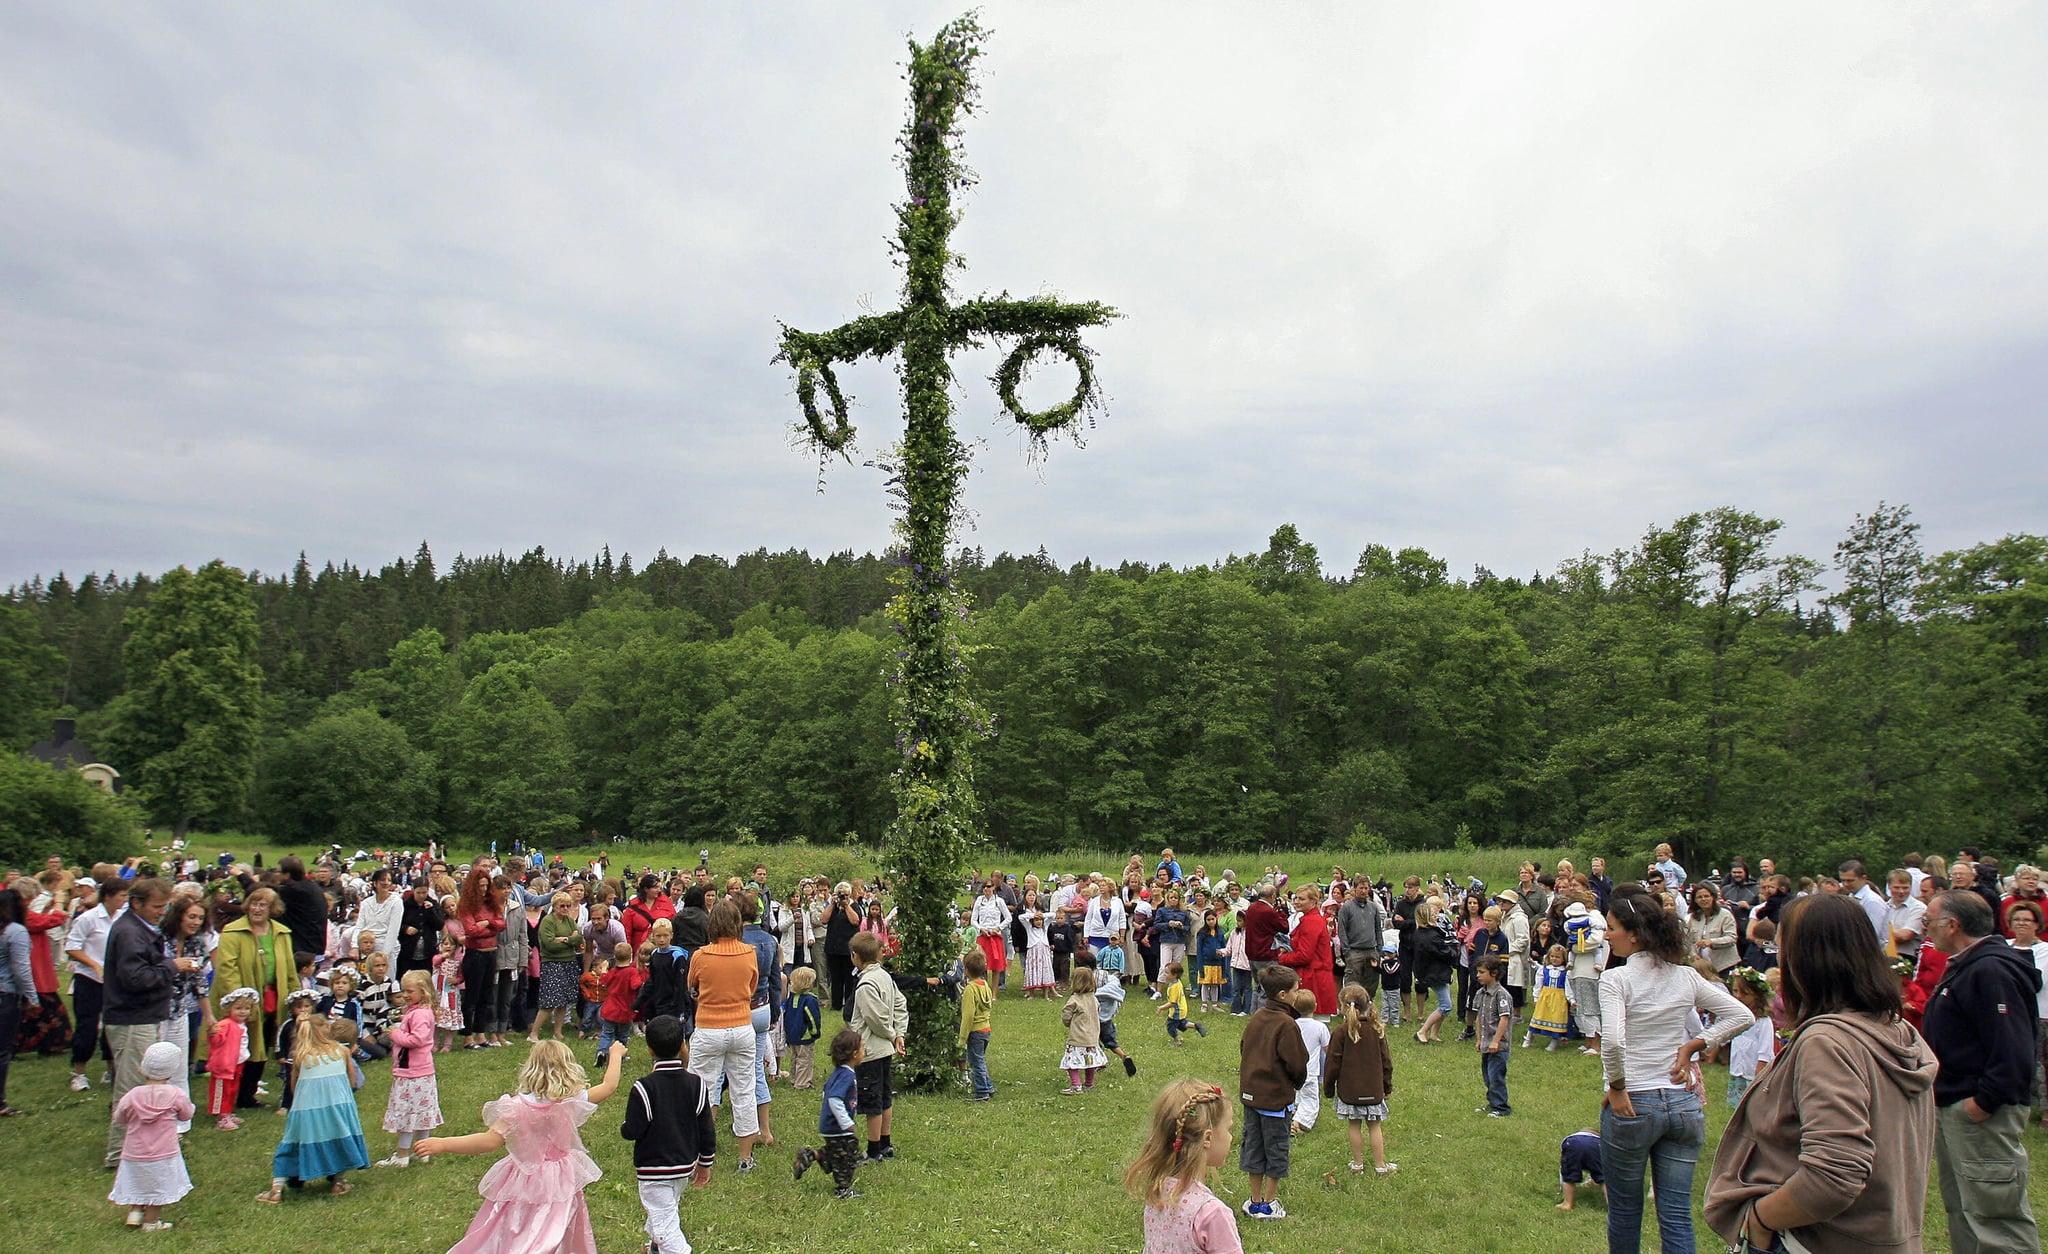 Is the Midsommar Festival Real?